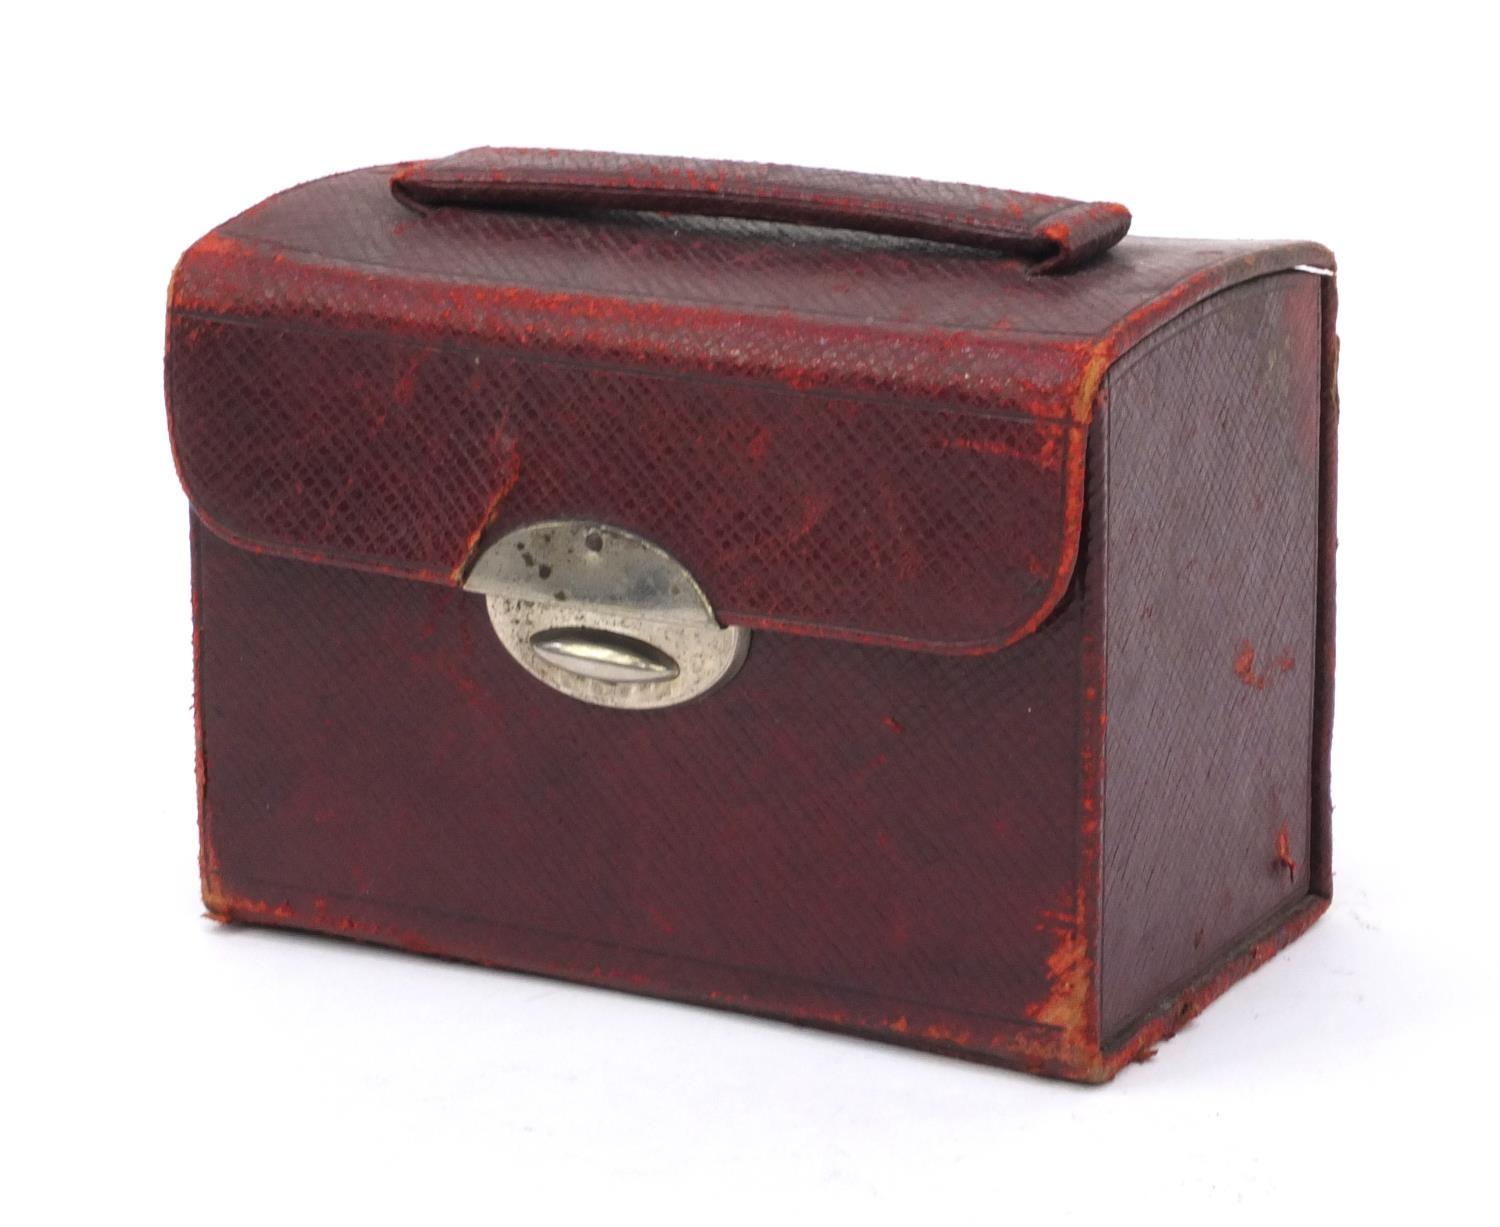 French doctor's red leather travelling case housing a selection of glass bottles, spoon, penknife - Image 4 of 5